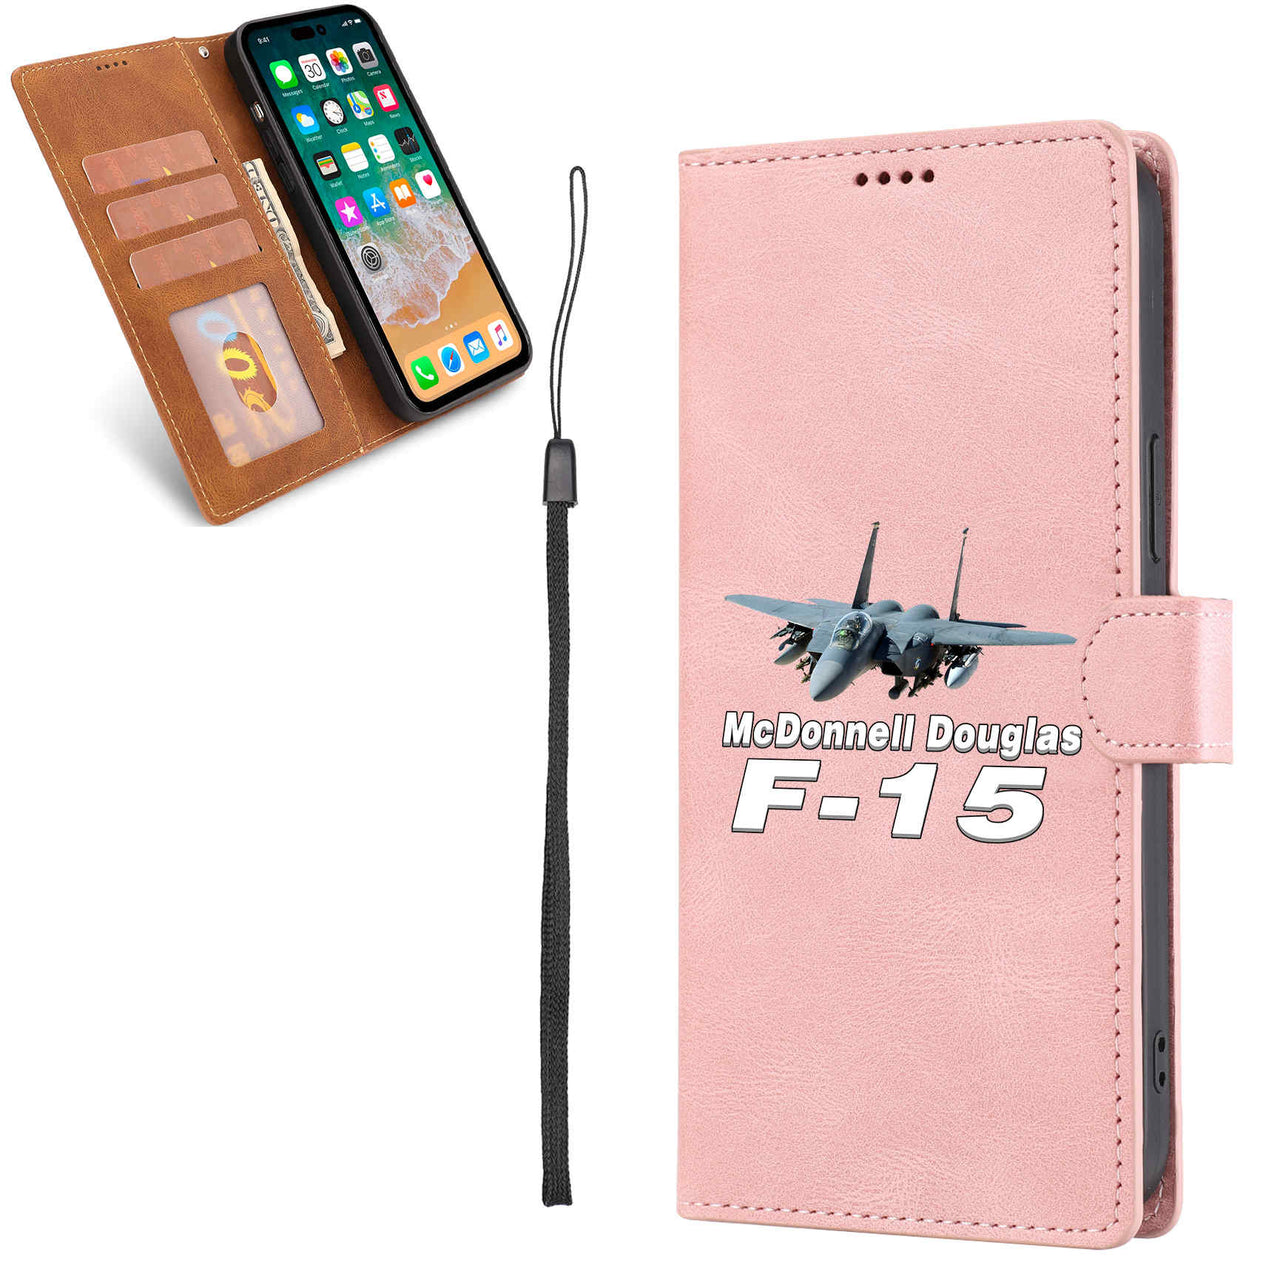 The McDonnell Douglas F15 Designed Leather Samsung S & Note Cases